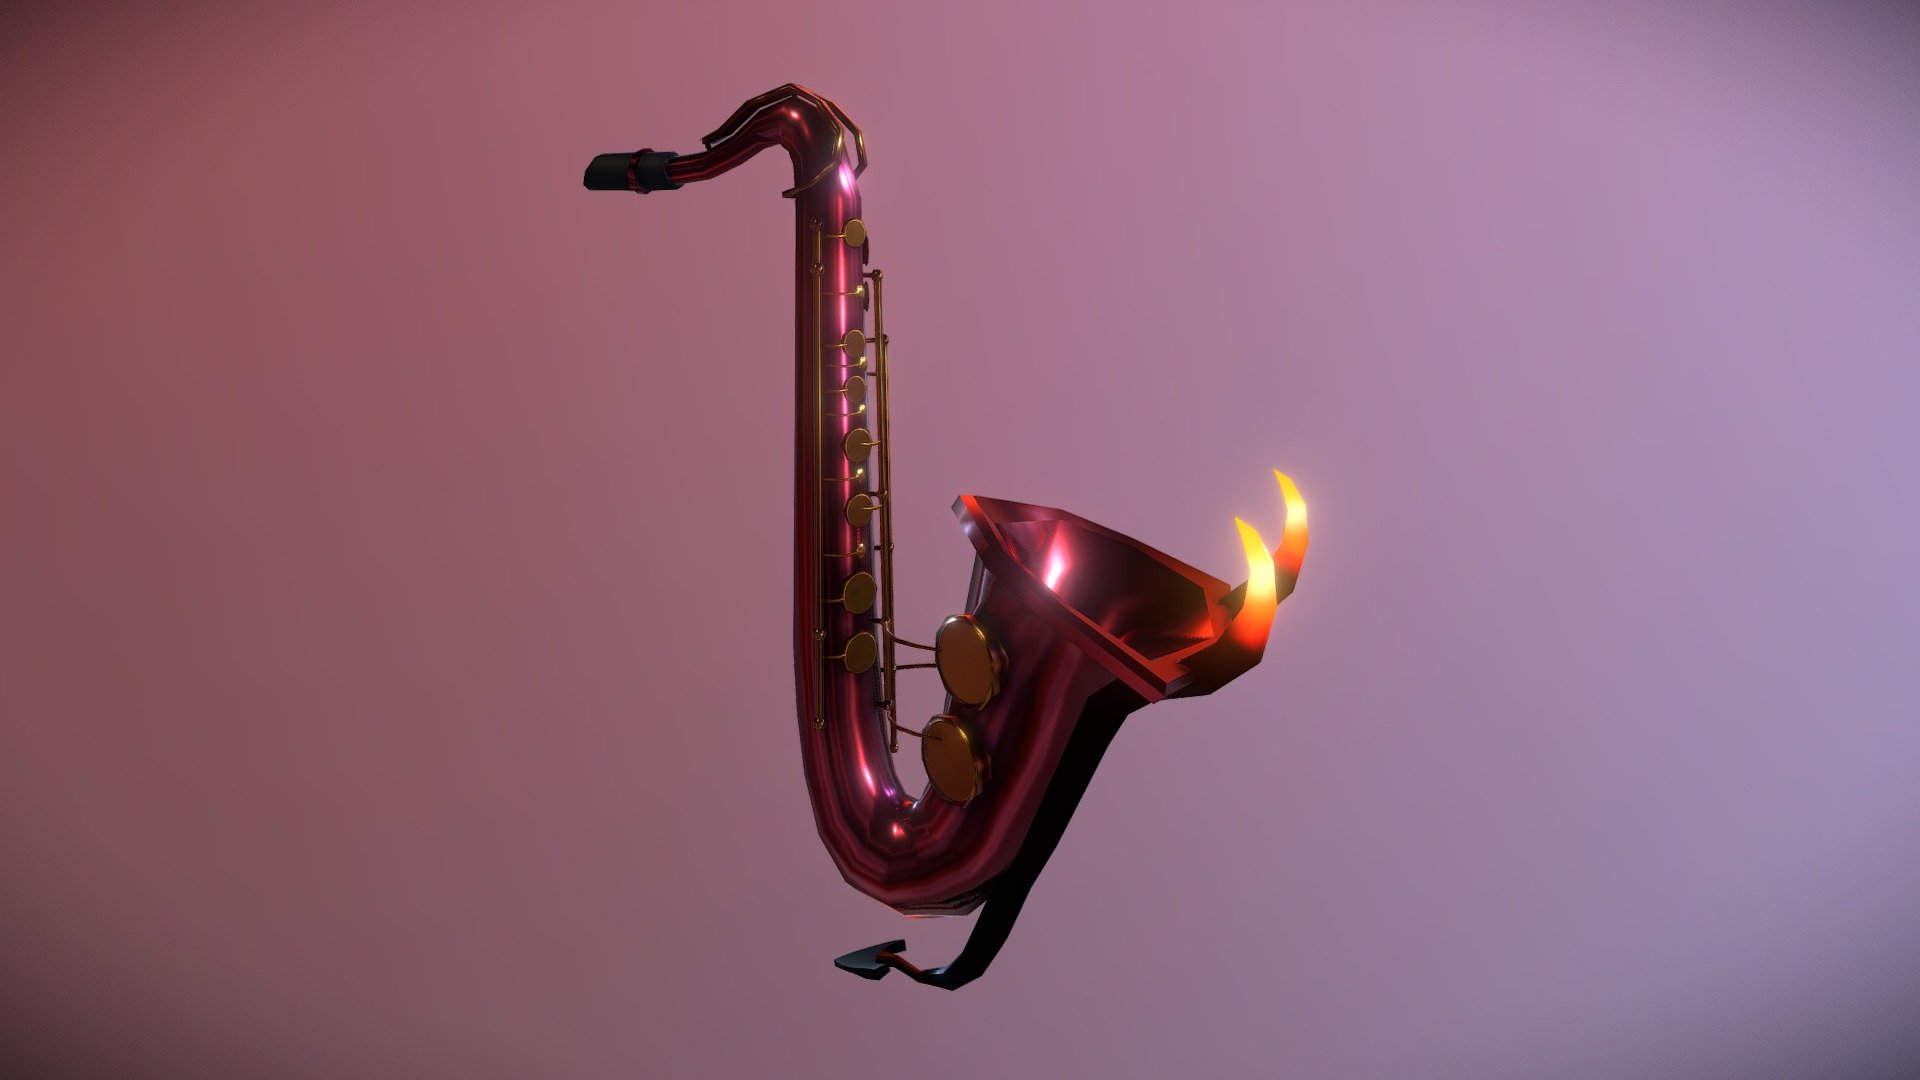 A devilish instrument that charms the unknowning.

Also comes with a cute little demon.

Made for a game school project.
Modeled in Maya. Textures were done in substance painter and photoshop.

Concept by Xerbatt

https://www.deviantart.com/sherbatt

https://sketchfab.com/Xerbatt - Devil's Saxophone - 3D model by Yno Dela Cruz (@MrFruitSalt) 3d model